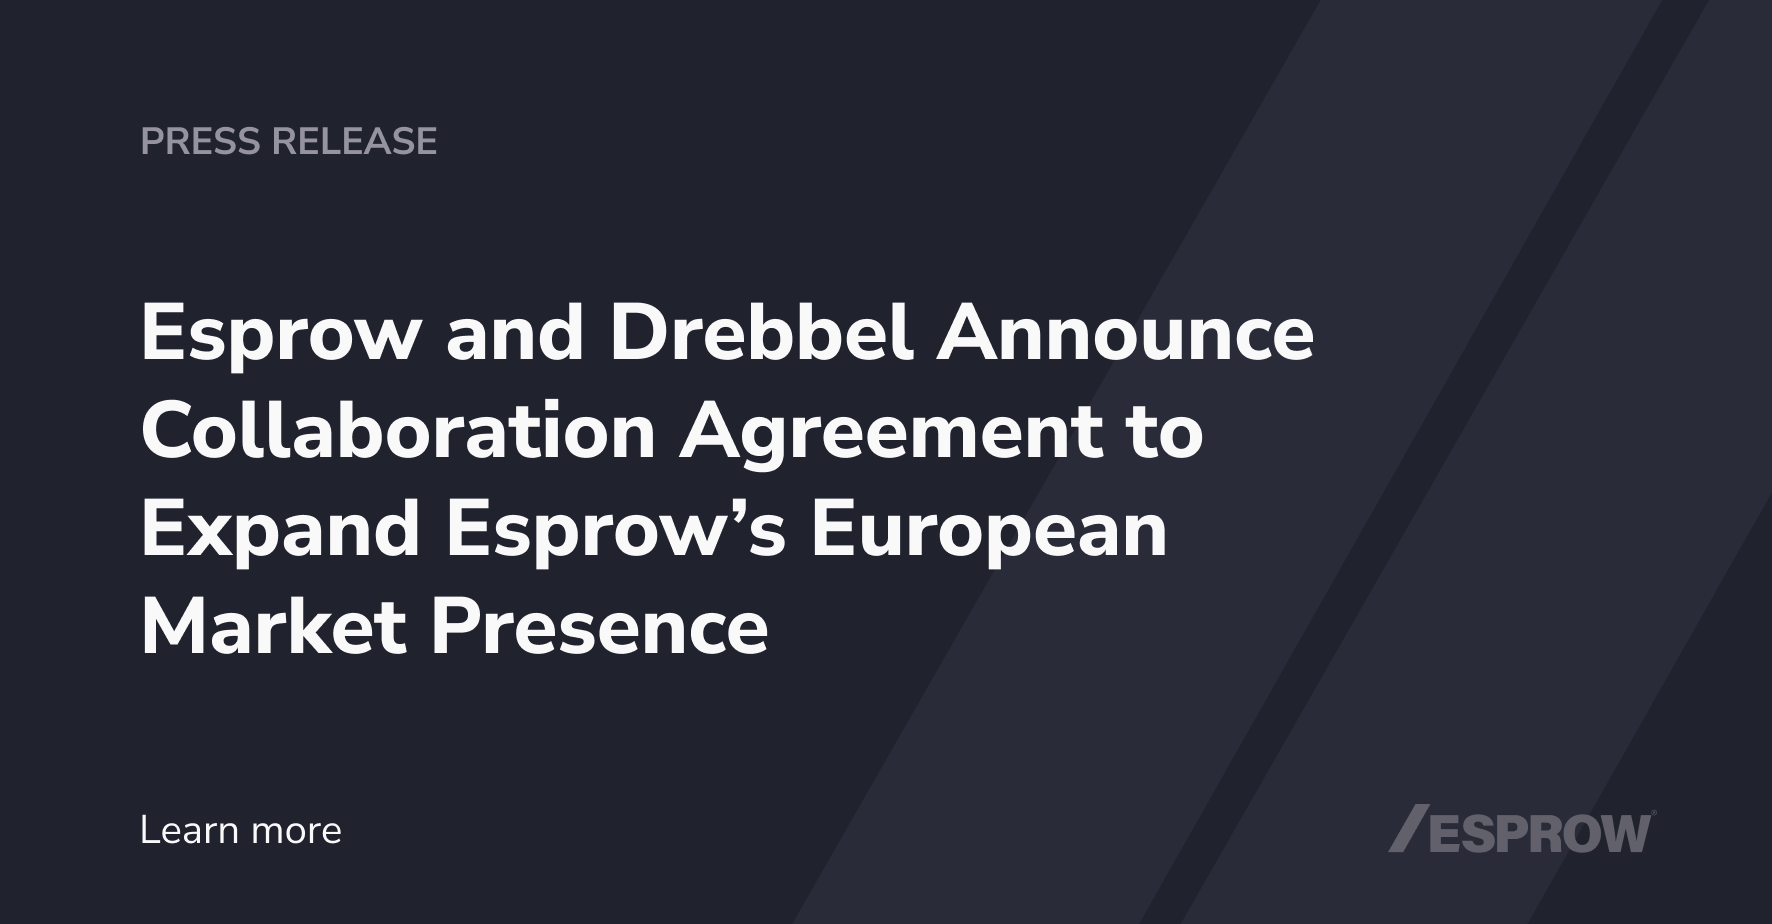 Esprow and Drebbel Announce Collaboration Agreement